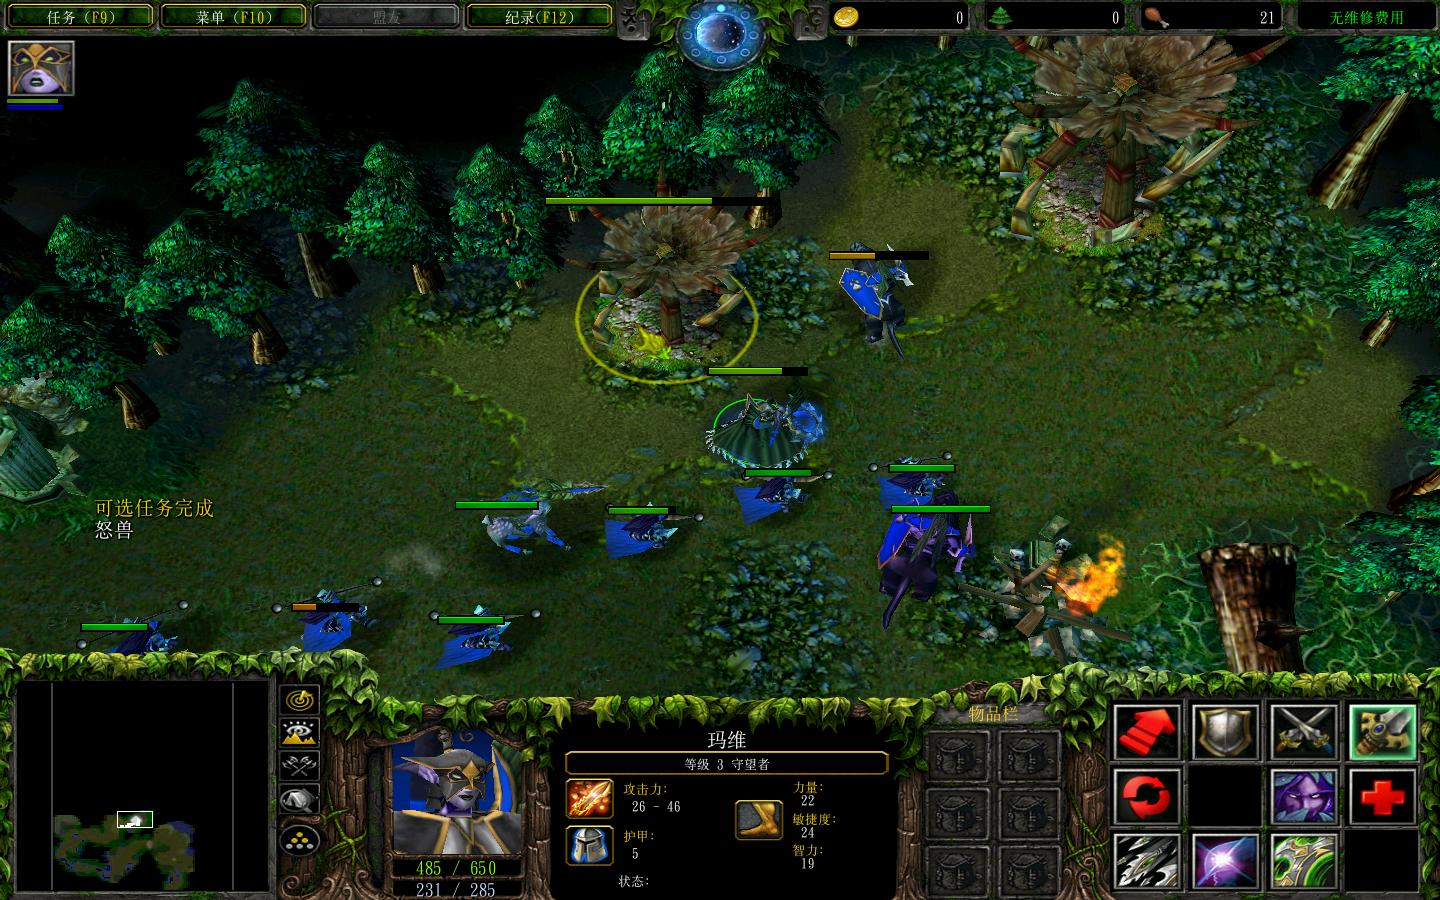 ħ3Warcraft III The Frozen Thronev1.24Ԫv1.27